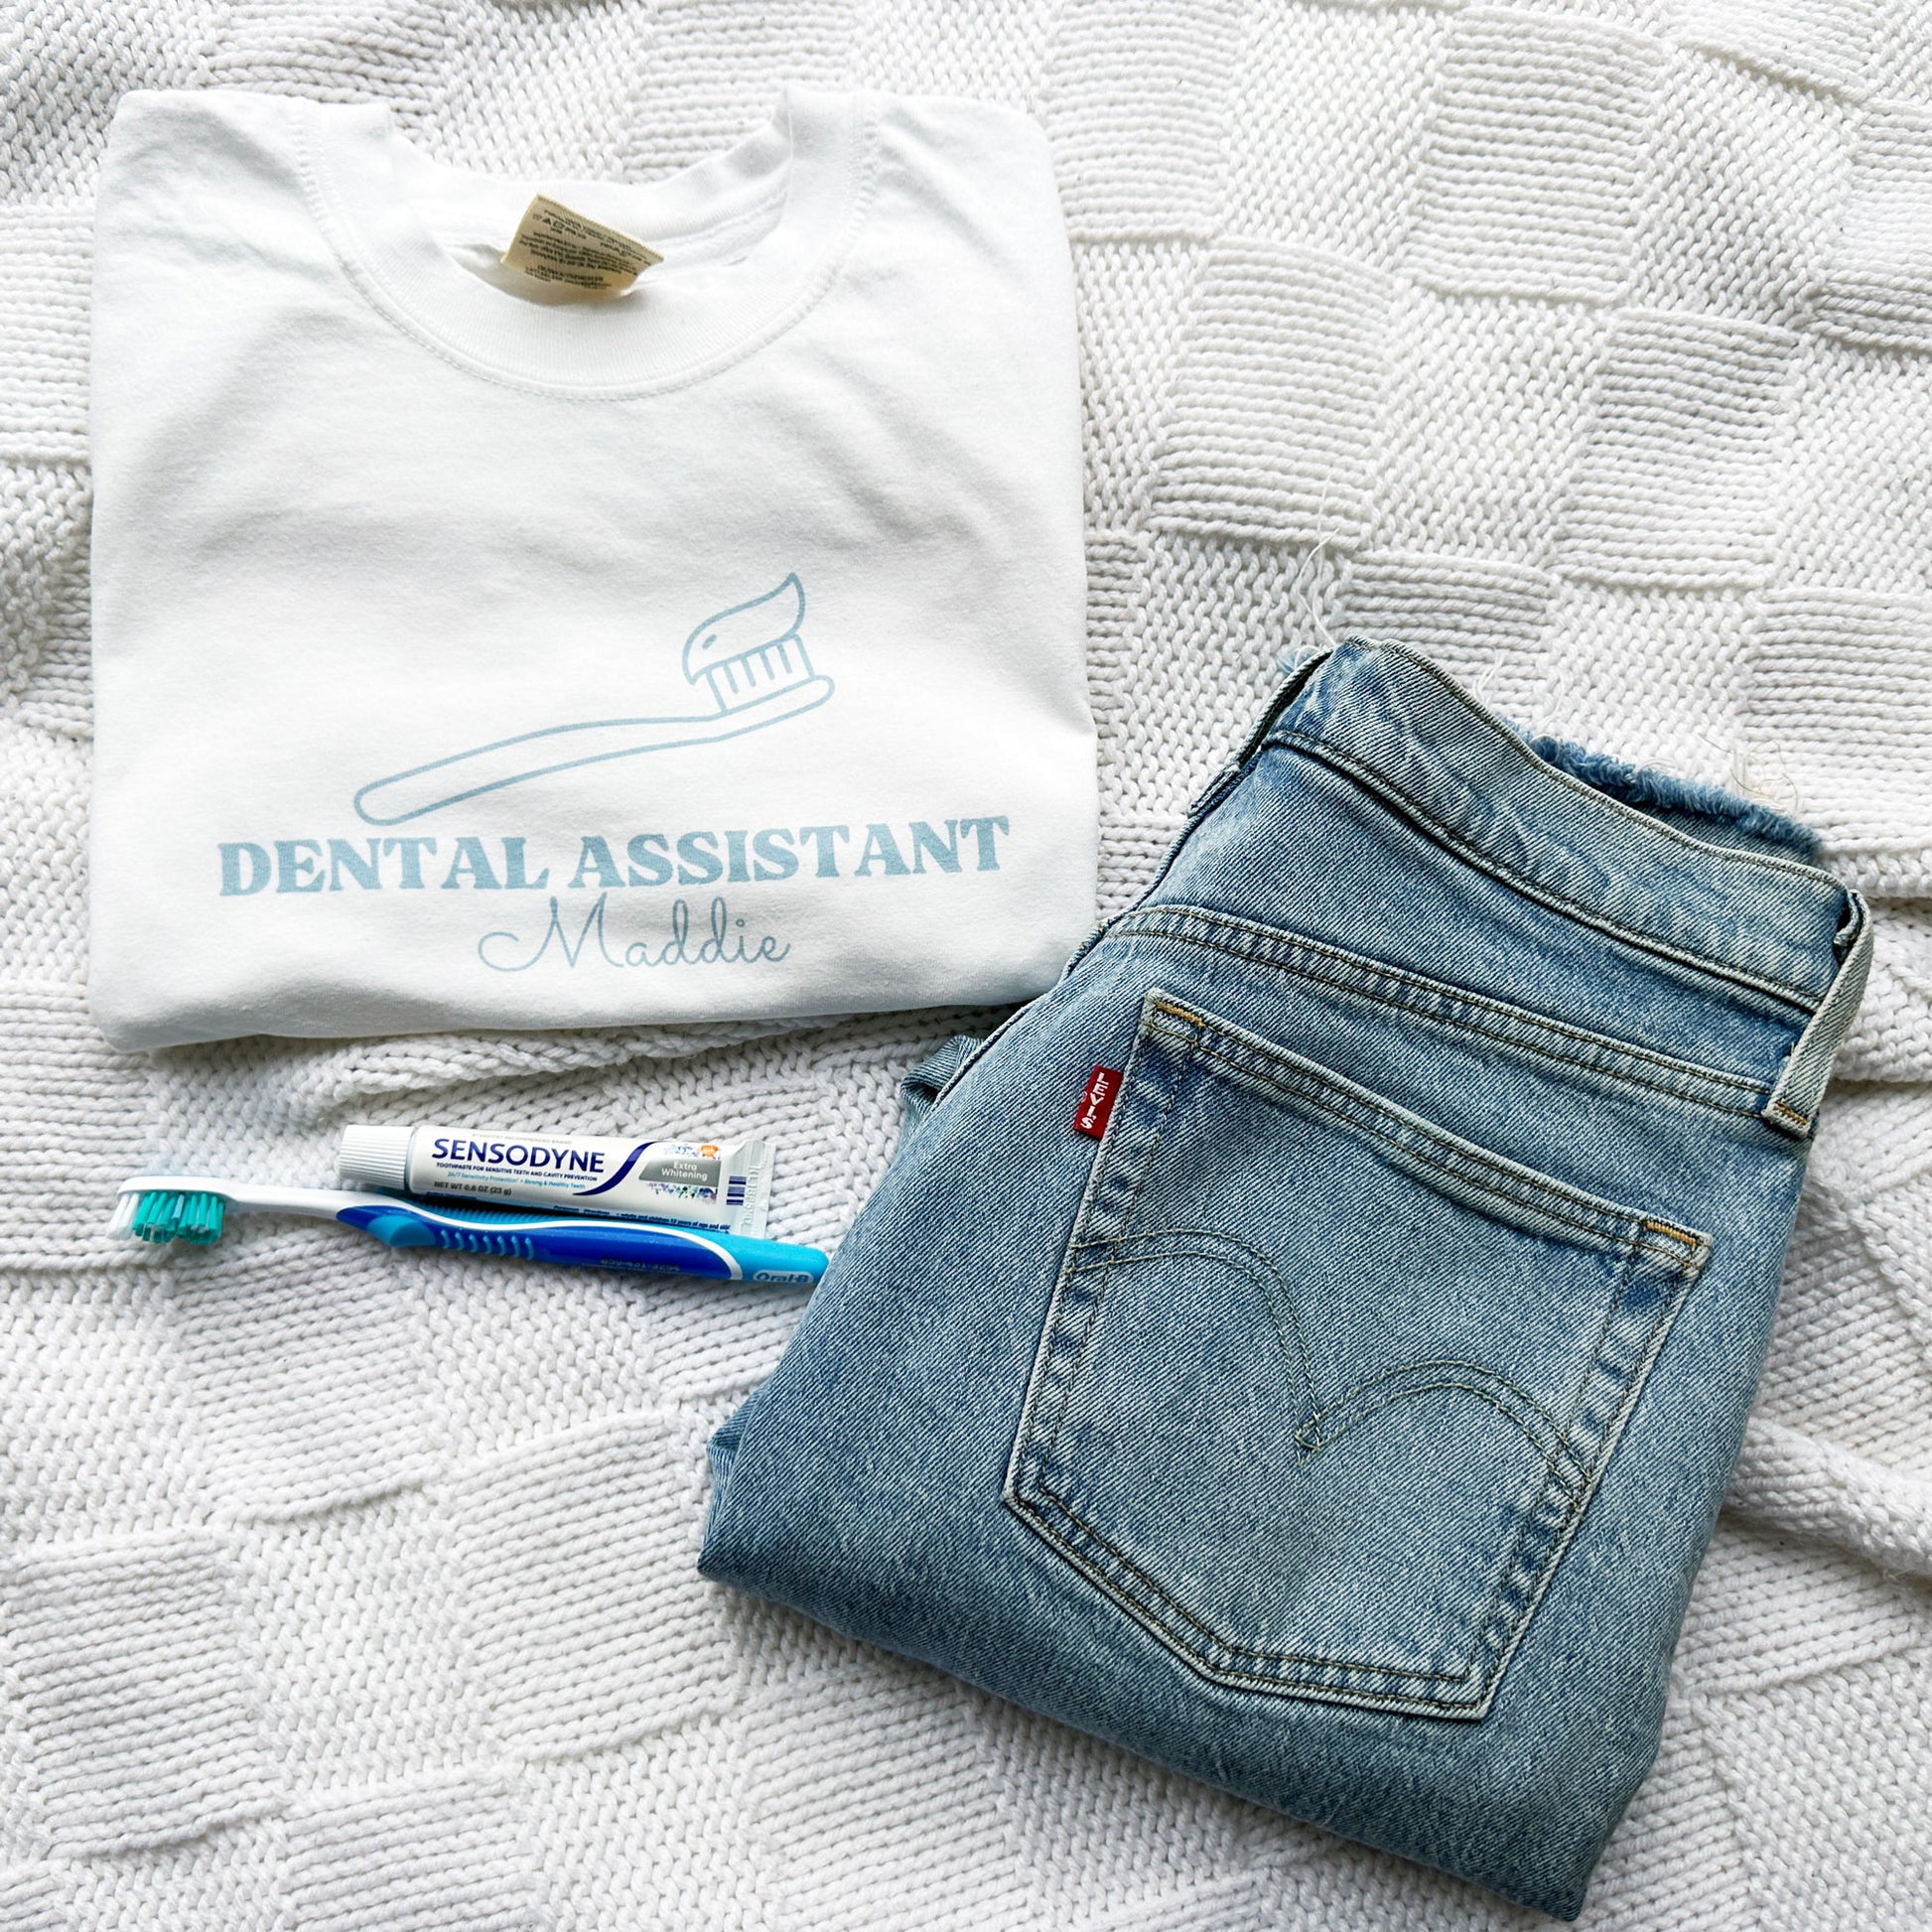 white dental assistant tee with jeans and a toothbrush